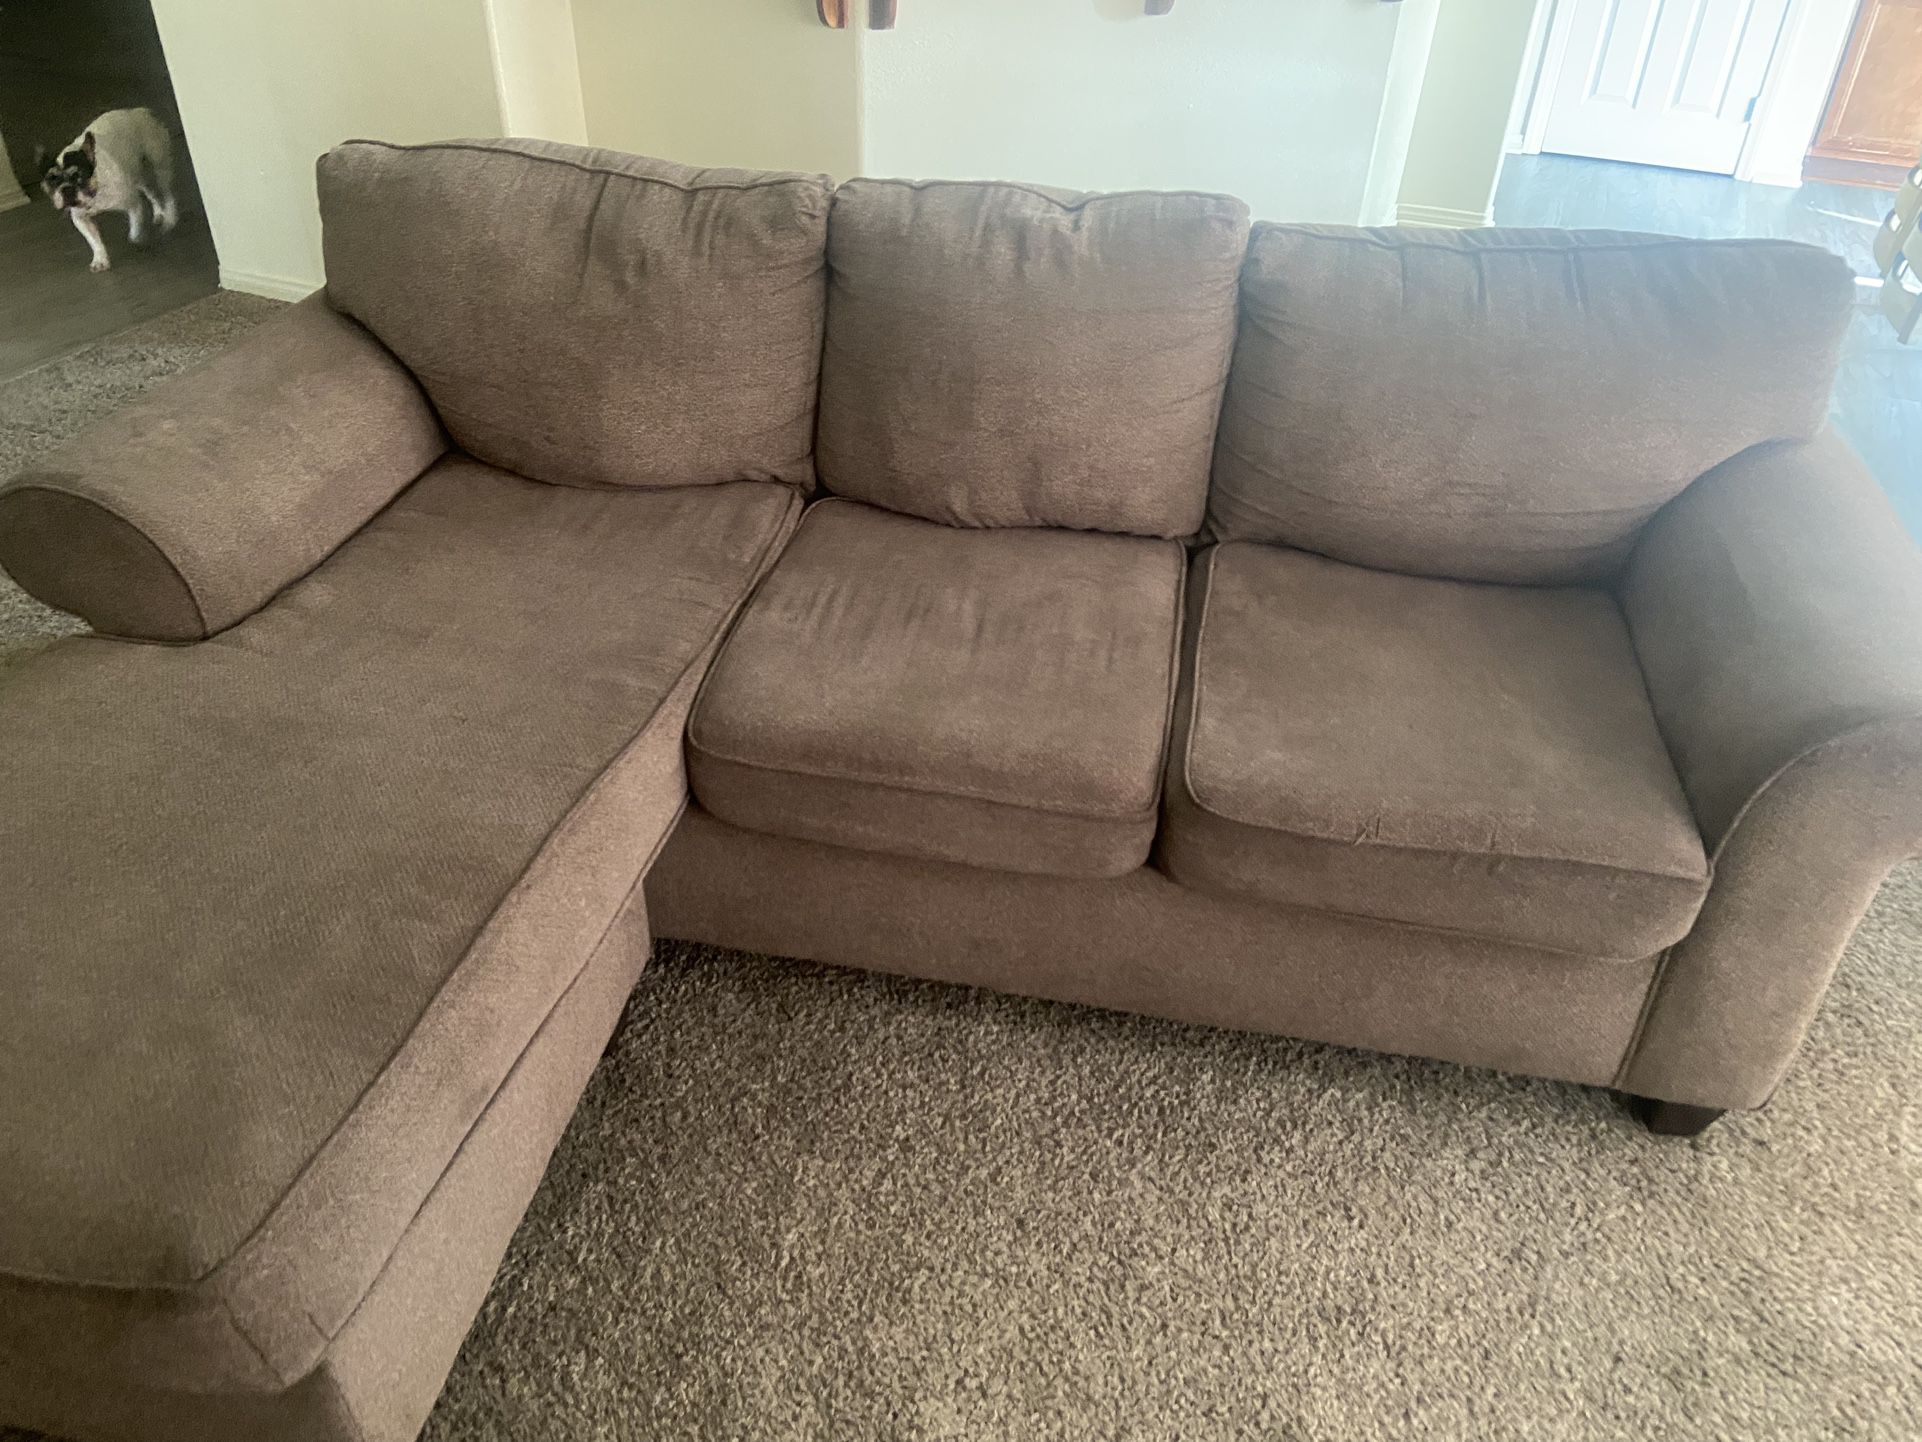 Couch And Recliner Chair (I’m moving soon so I just need it gone )